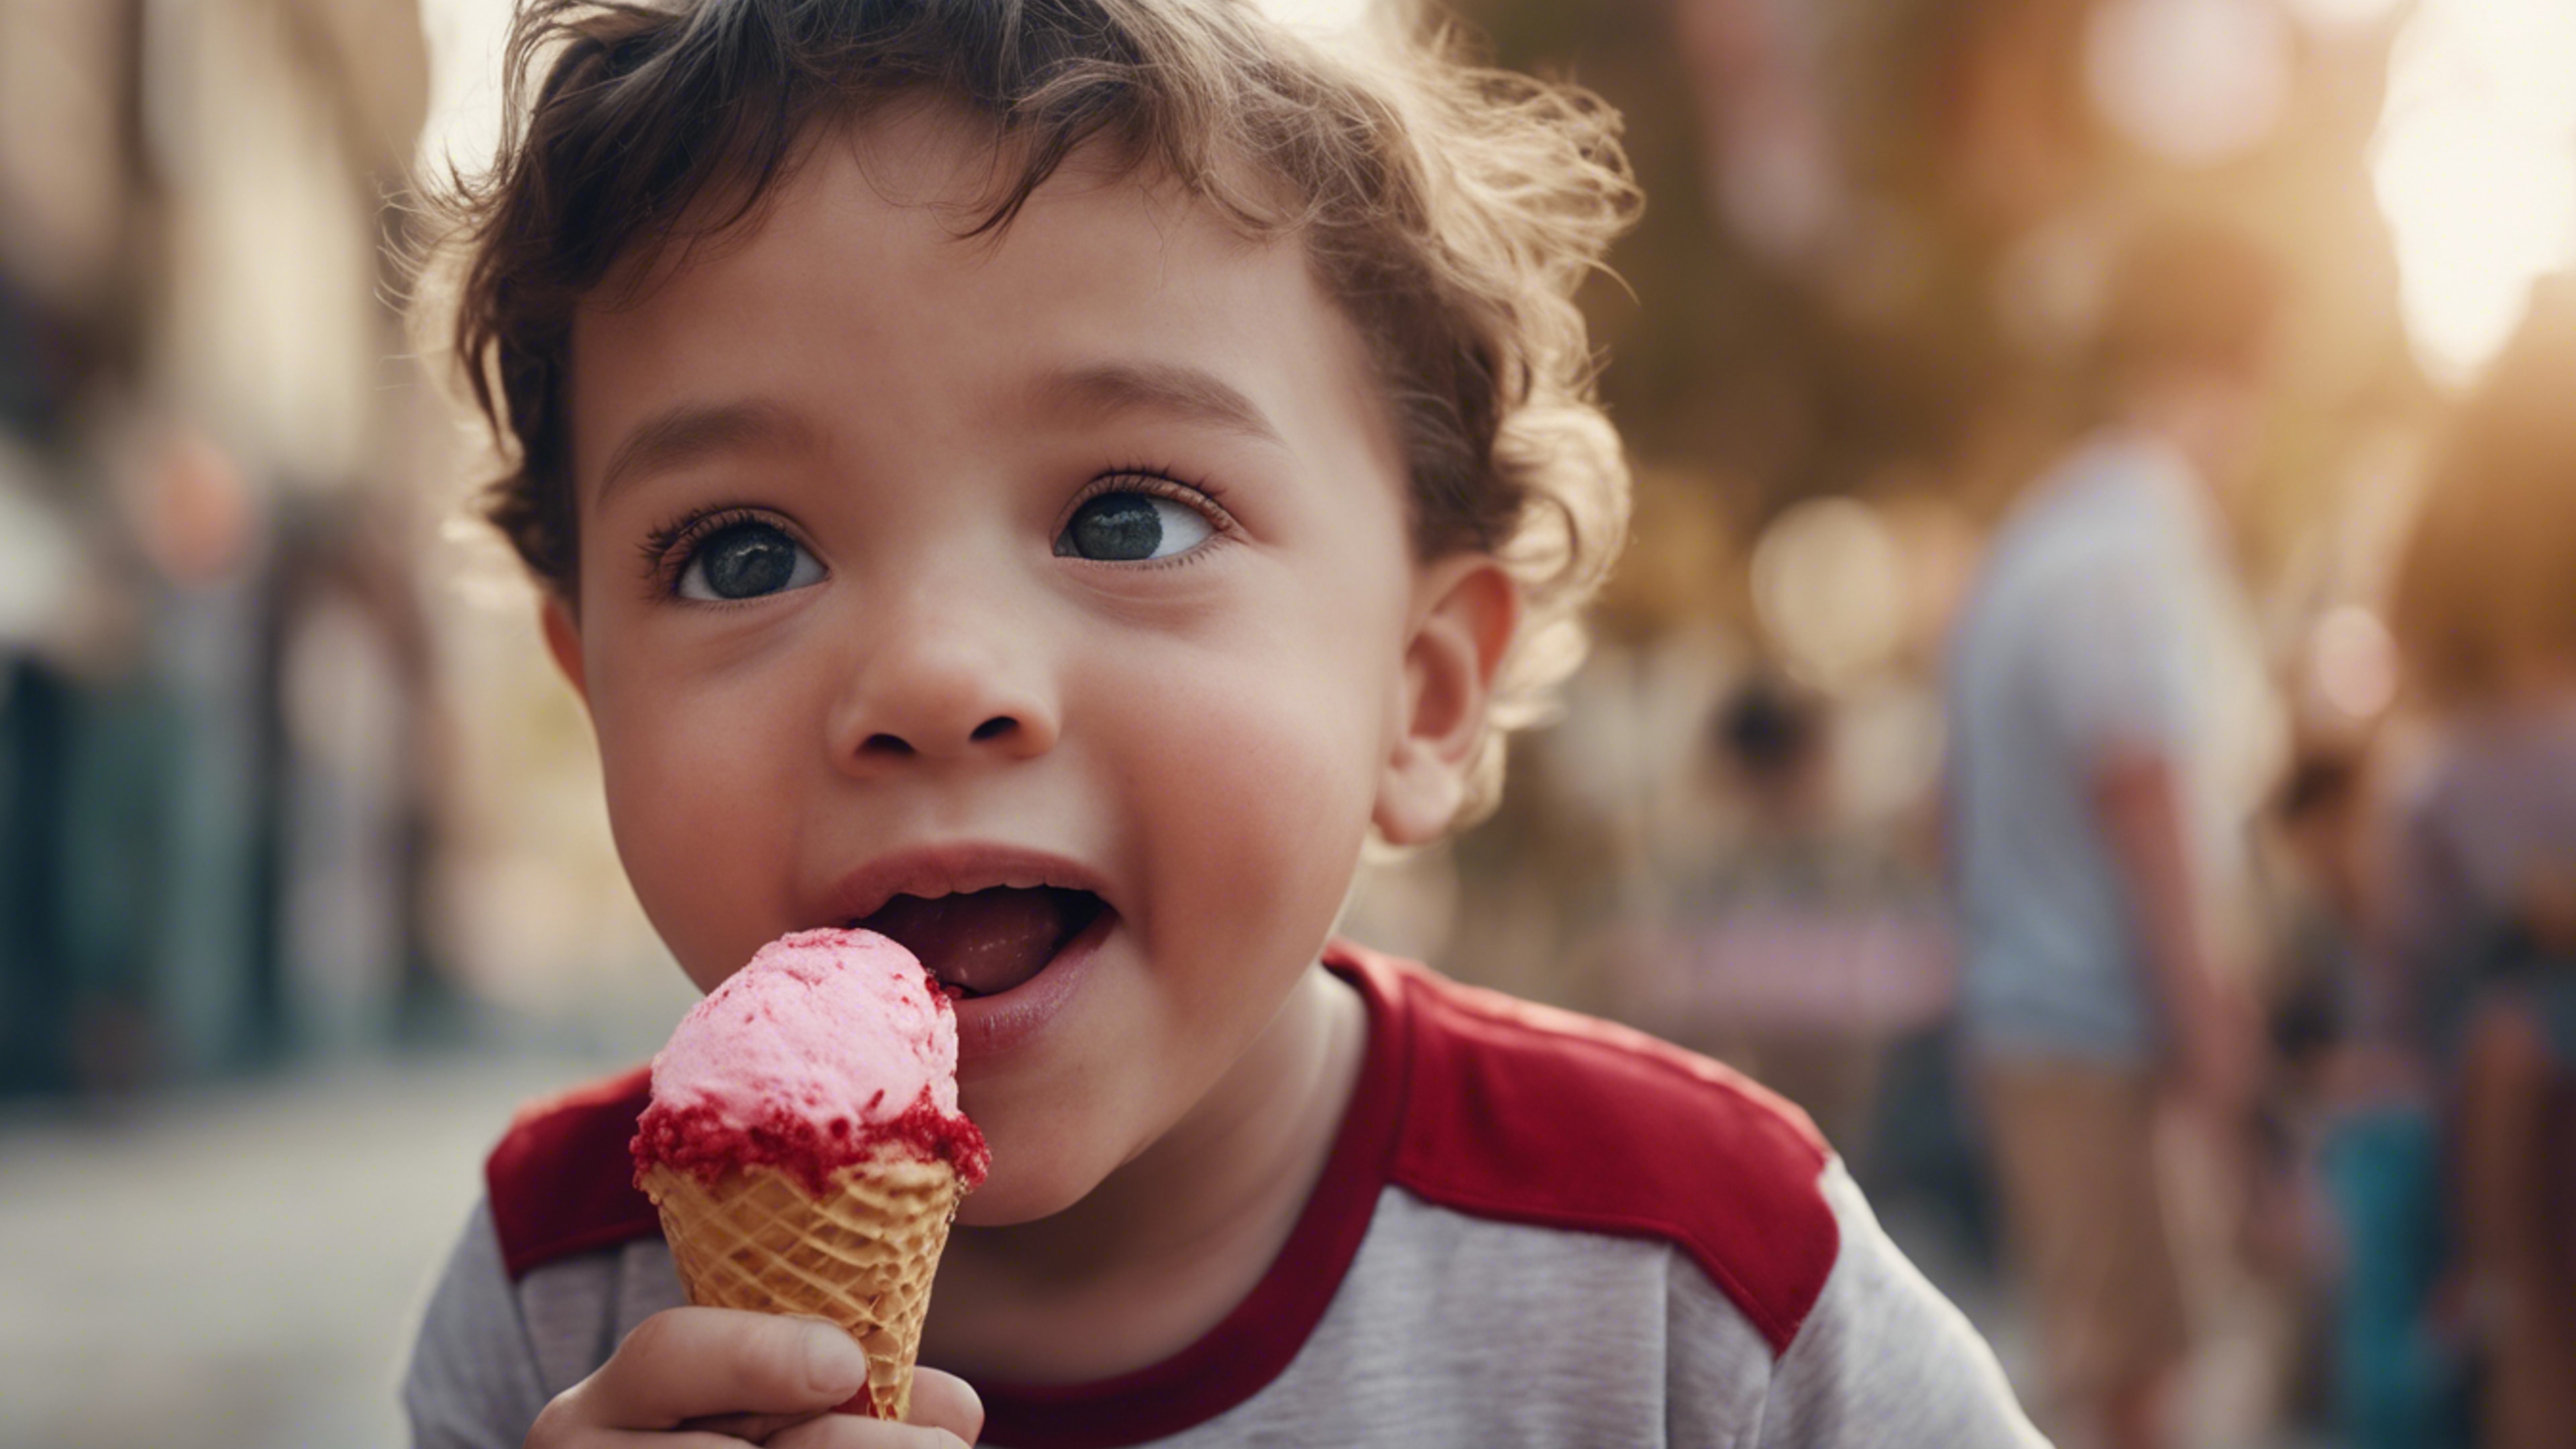 A small child delighting in a red velvet ice cream cone, with a wide-eyed expression of joy on his face. Tapeta[7a3fbd1e60614c42931f]